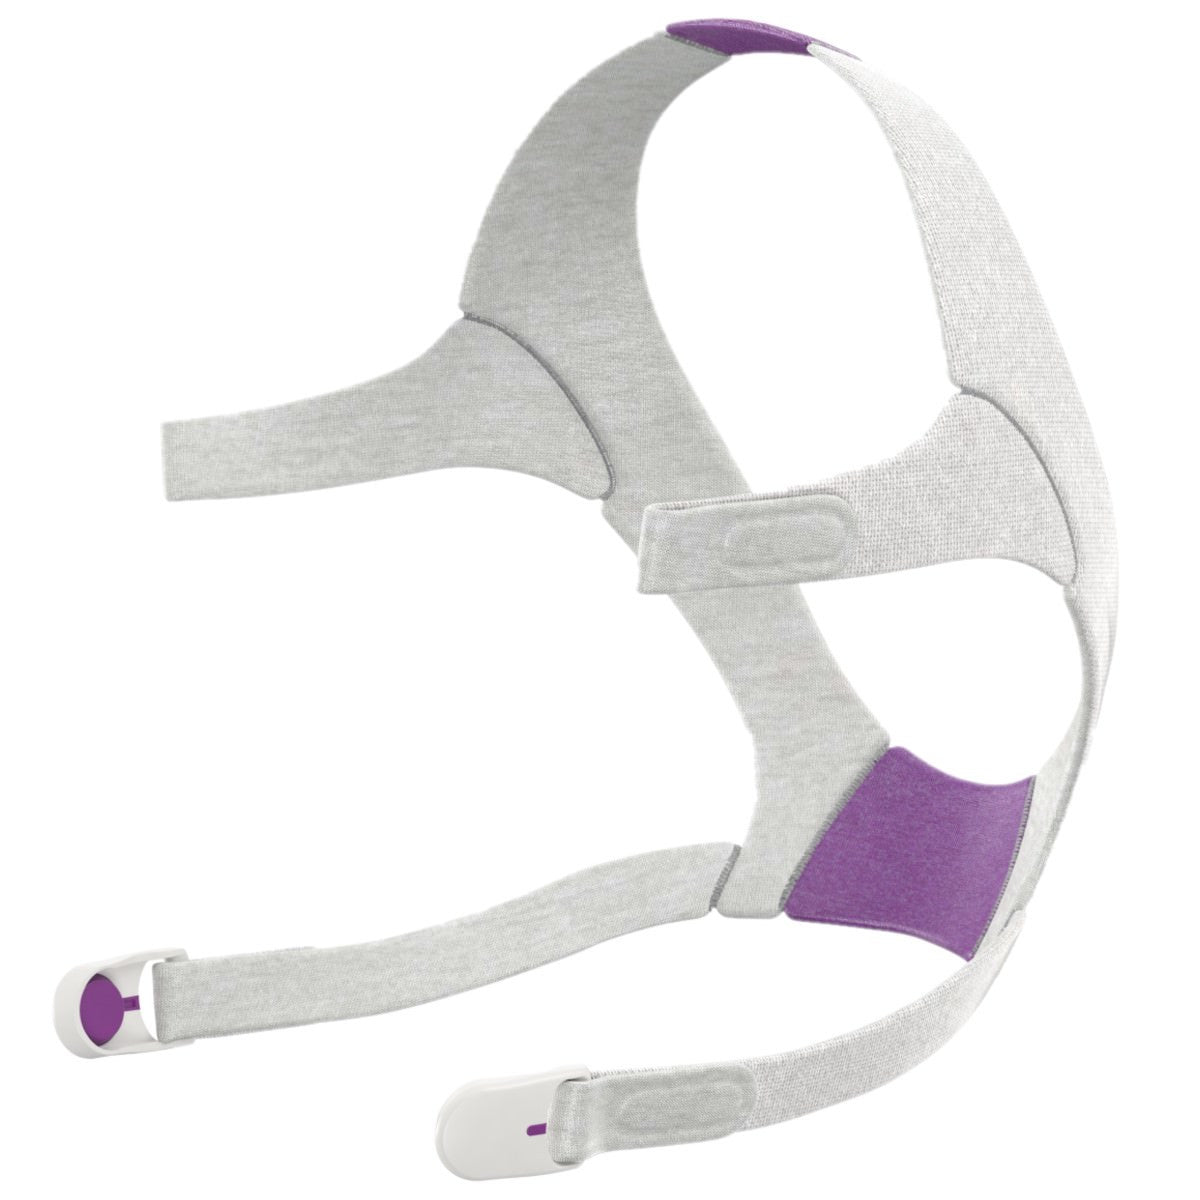 ResMed Airfit N20 For Her Nasal Mask Headgear with Clips